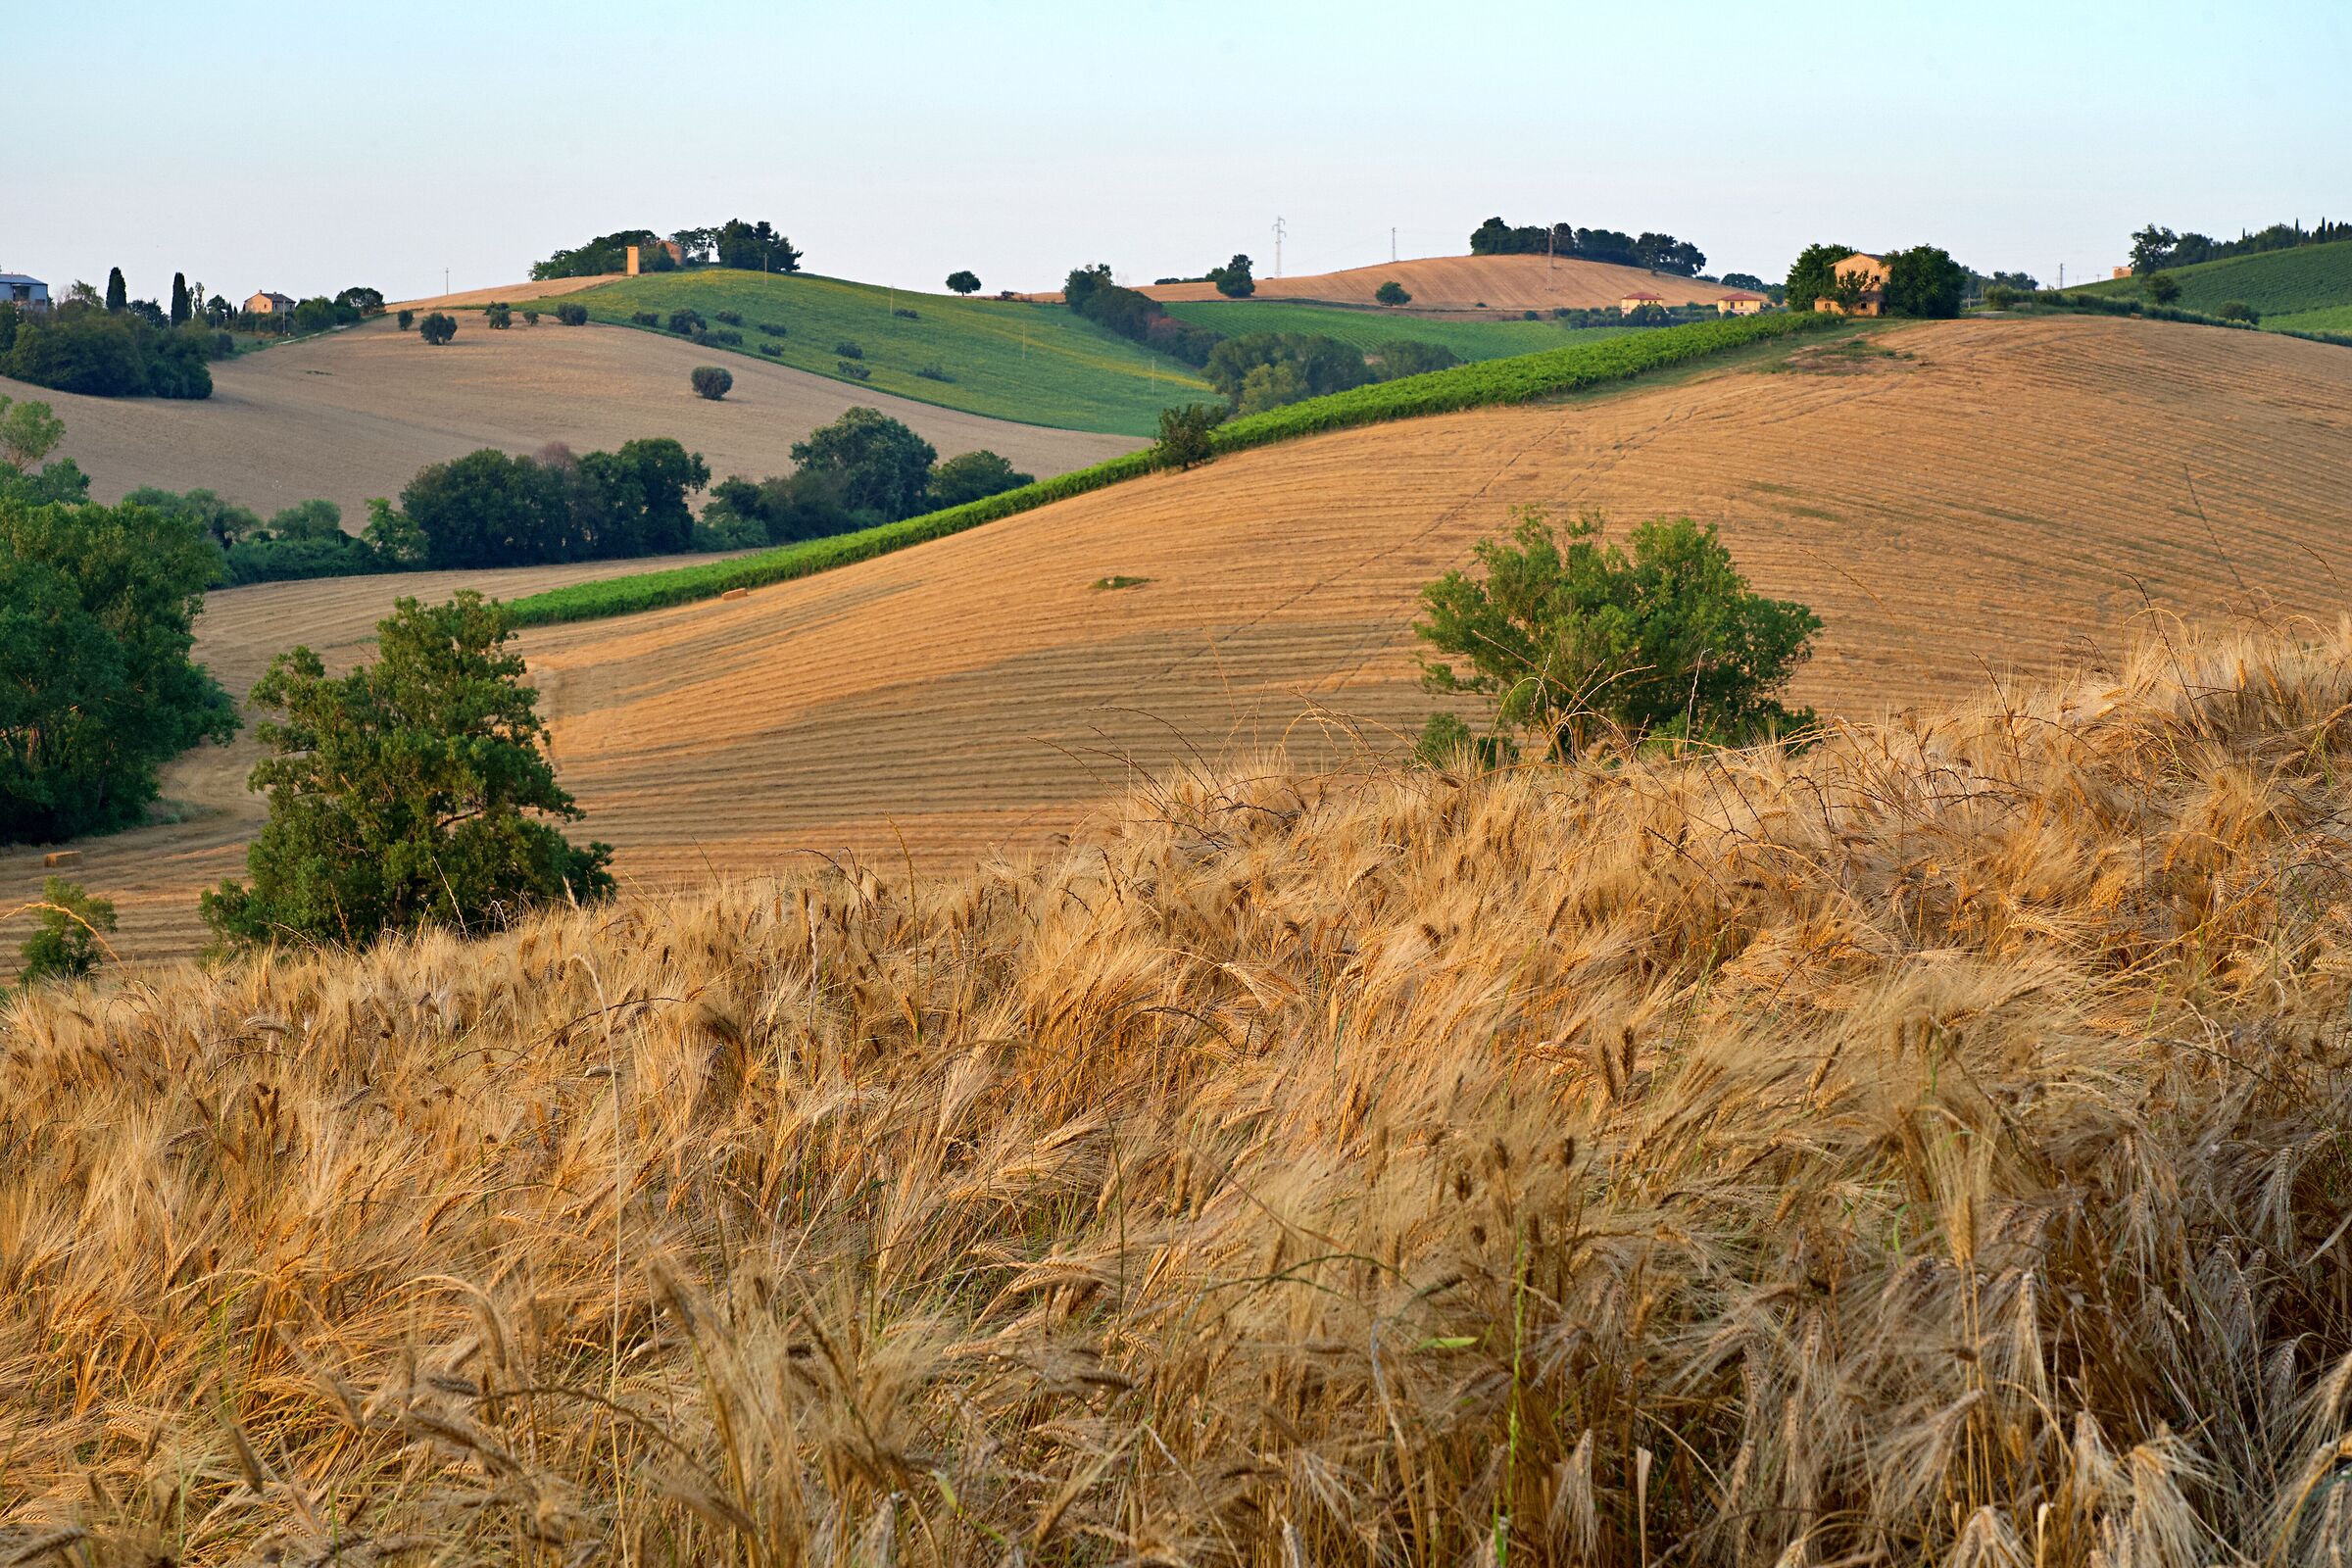 Wheat fields on the hills...